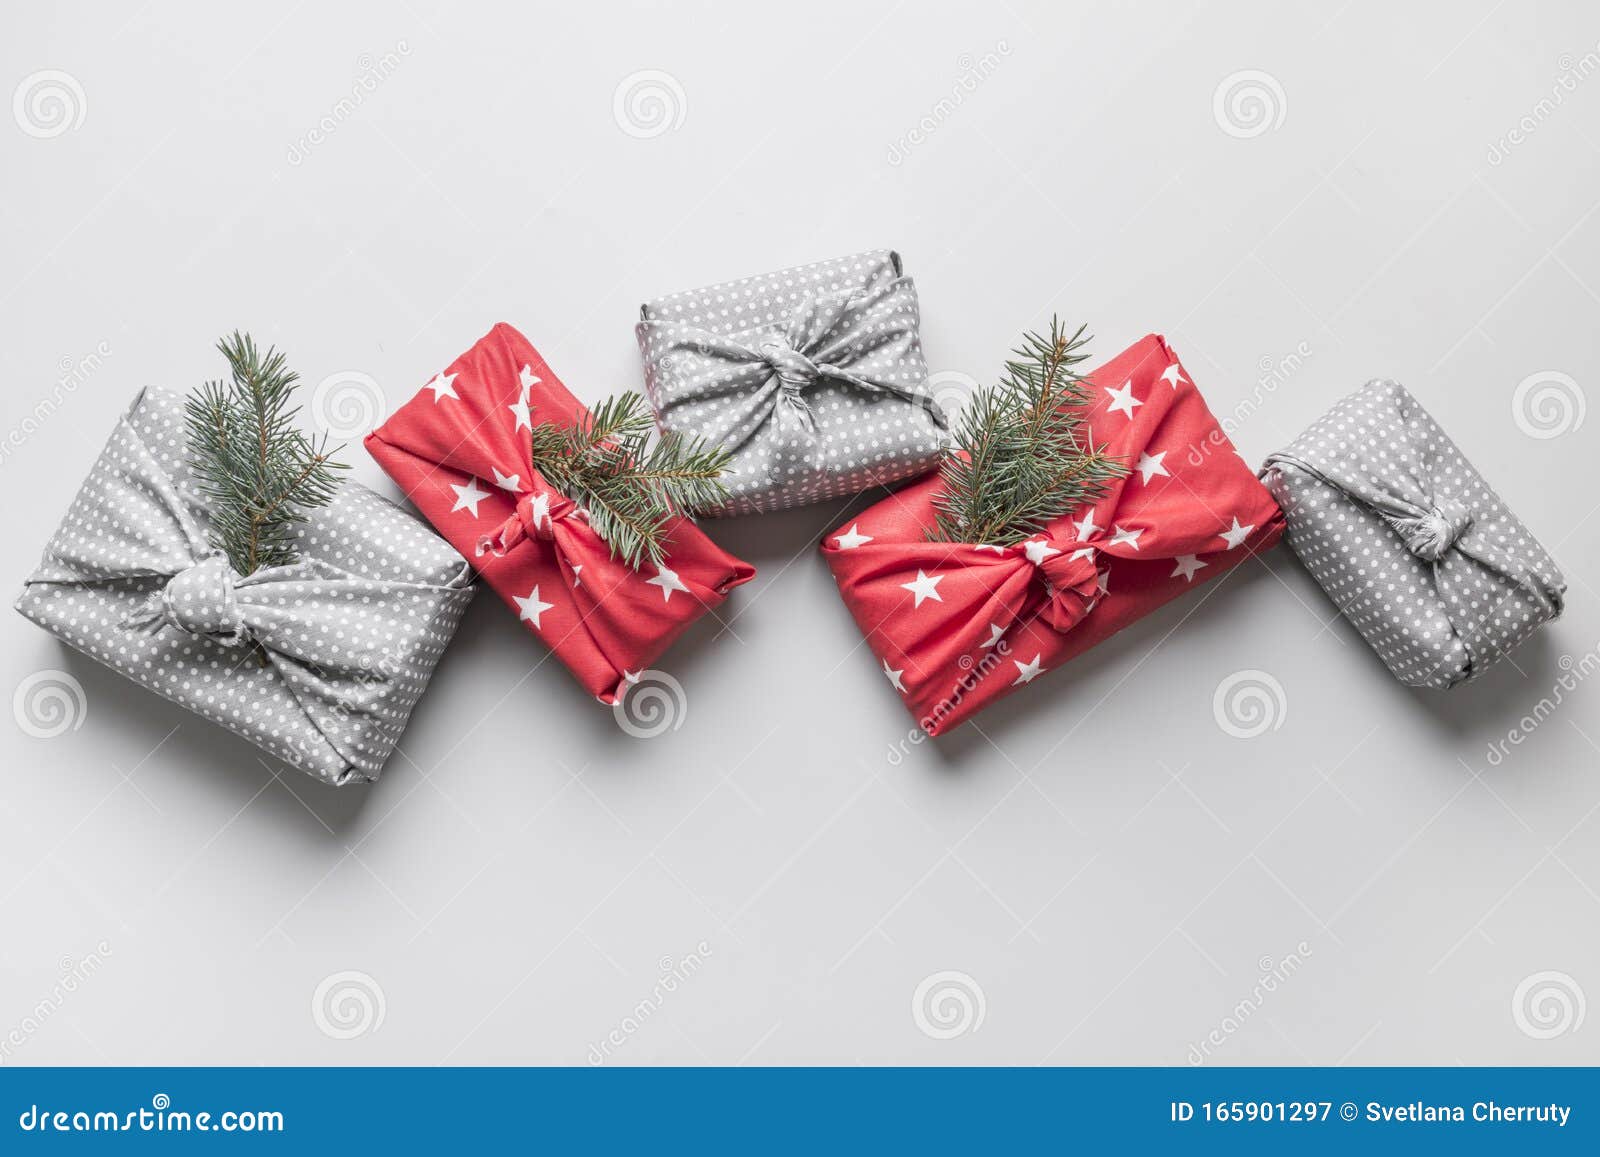 Christmas Gifts Wrapped in Textile with Natural Decor. Sustainable